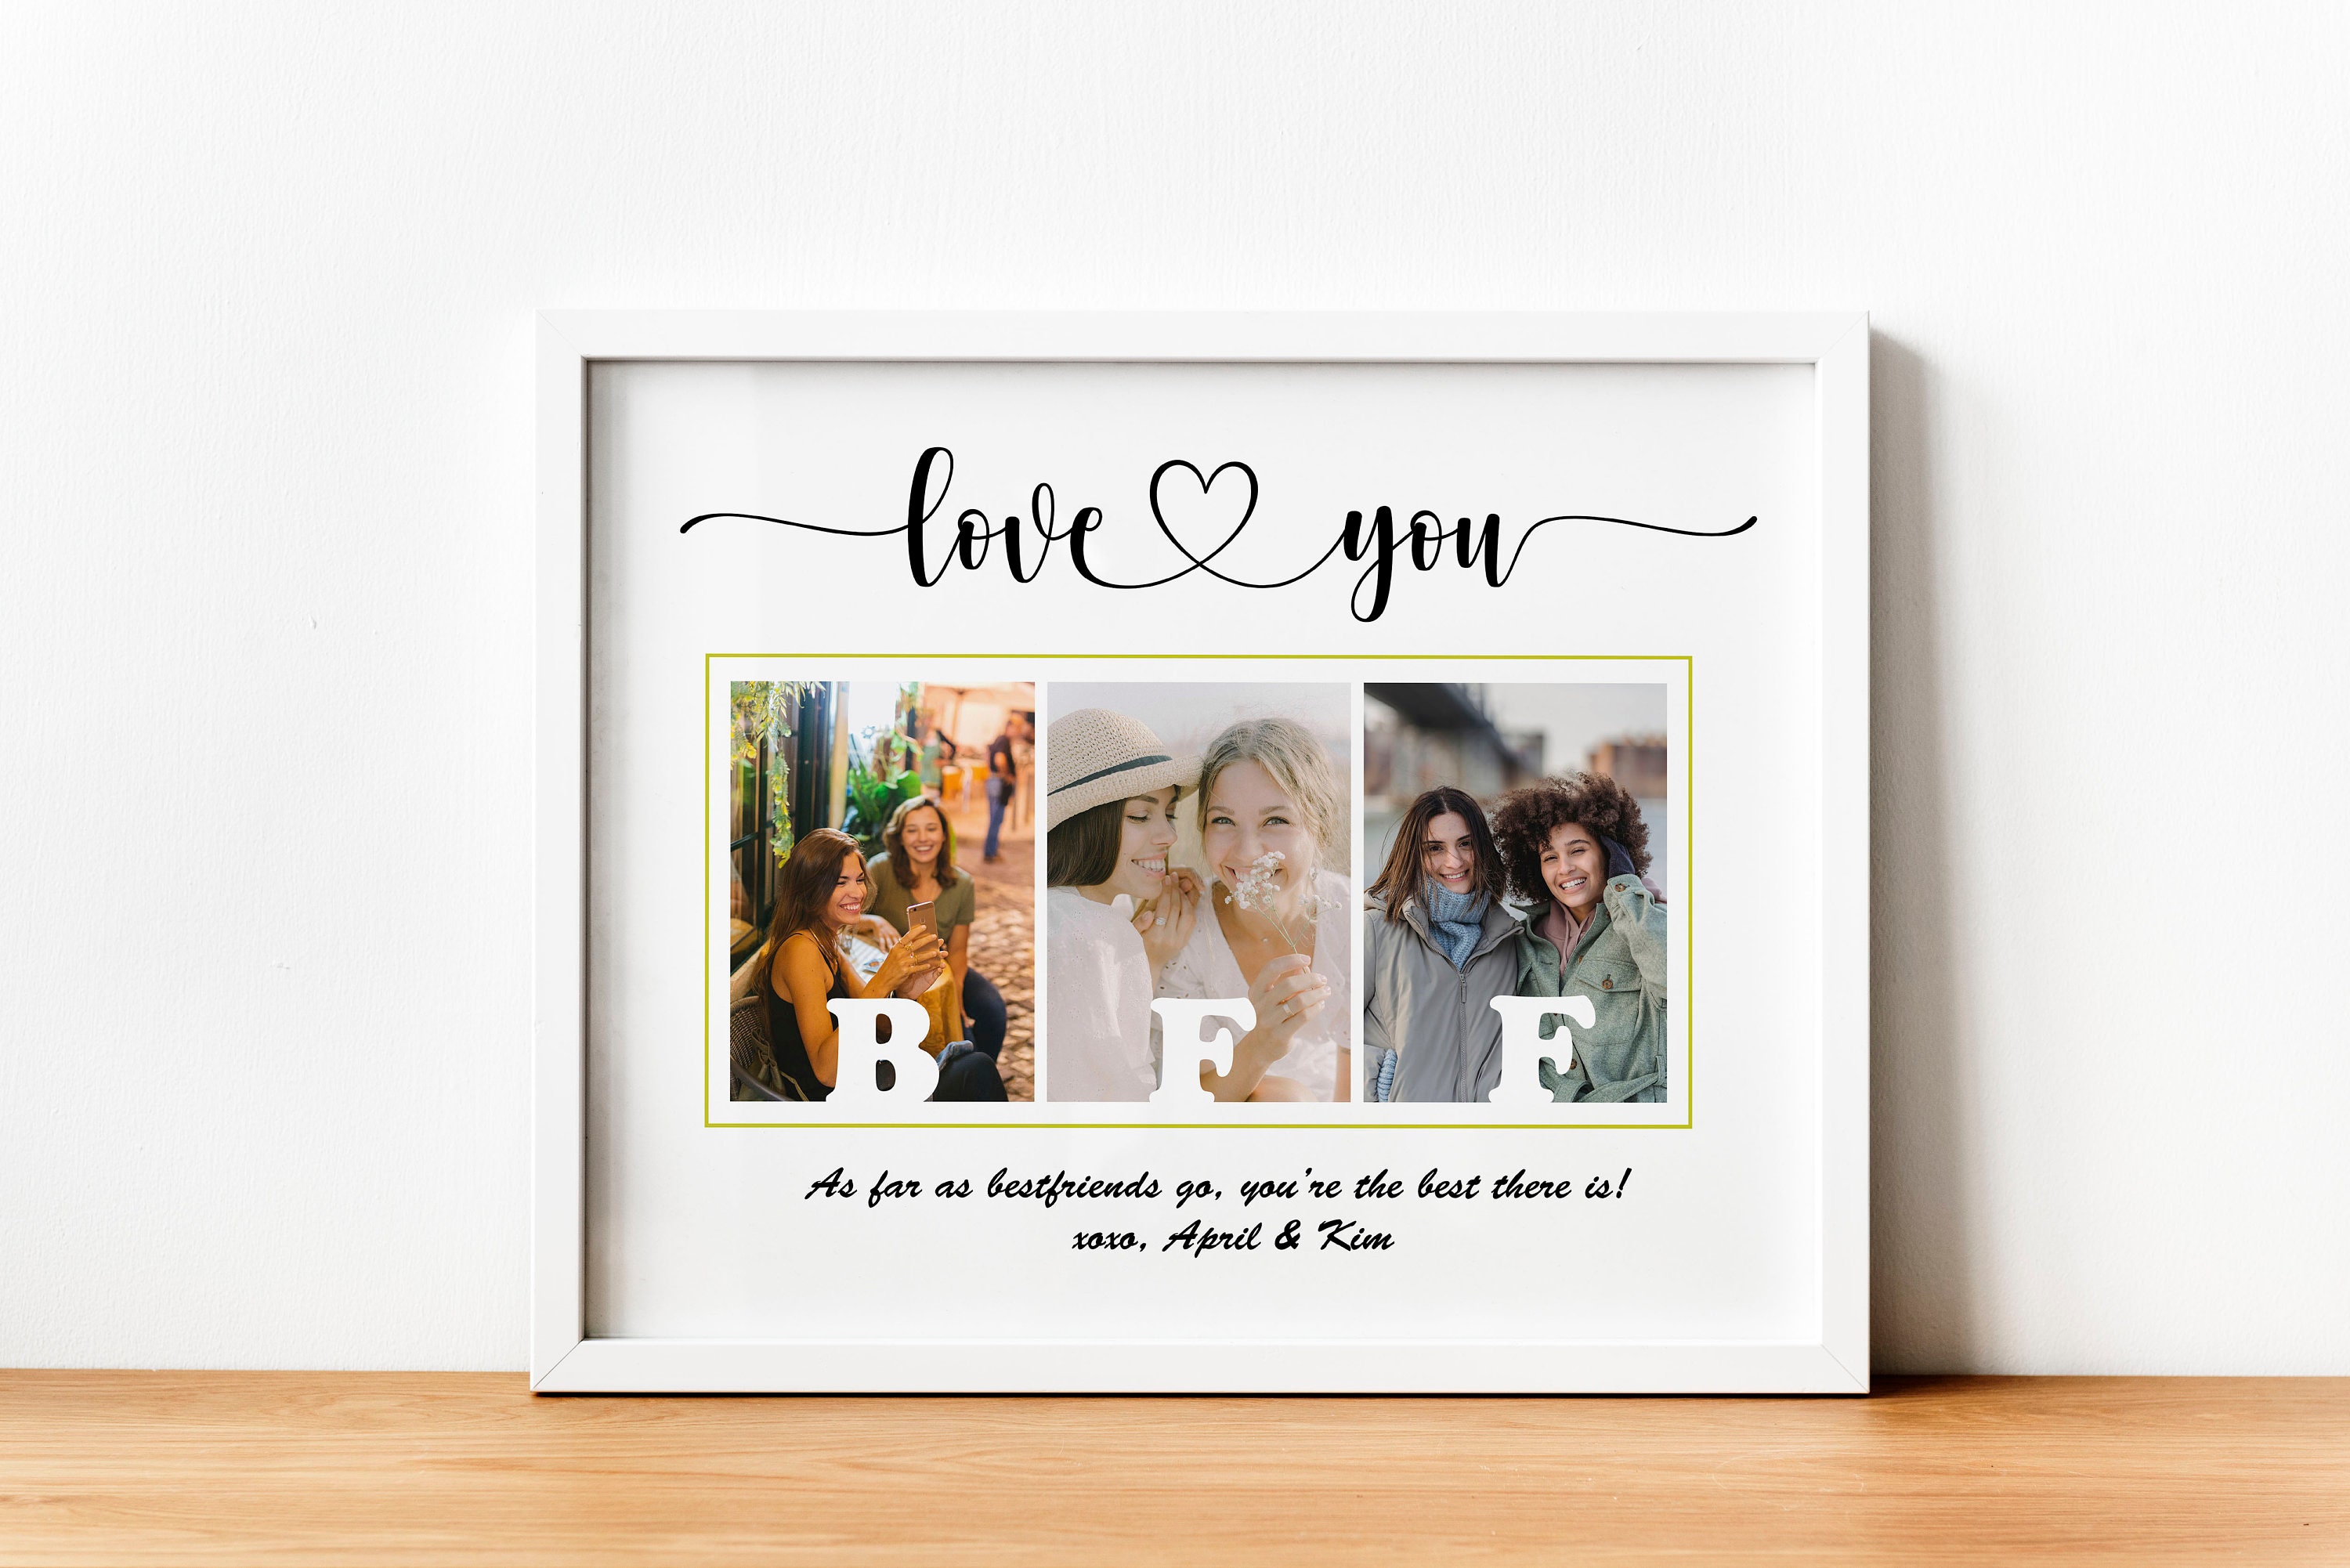  Best Friend Birthday Gifts for Women Teen Girls, Christmas Gifts  for Best Friend Picture Frame, Long Distance Friendship Gifts for BFF  Besties Sister Photo Holder Hanging Photo Display Collage Frame 